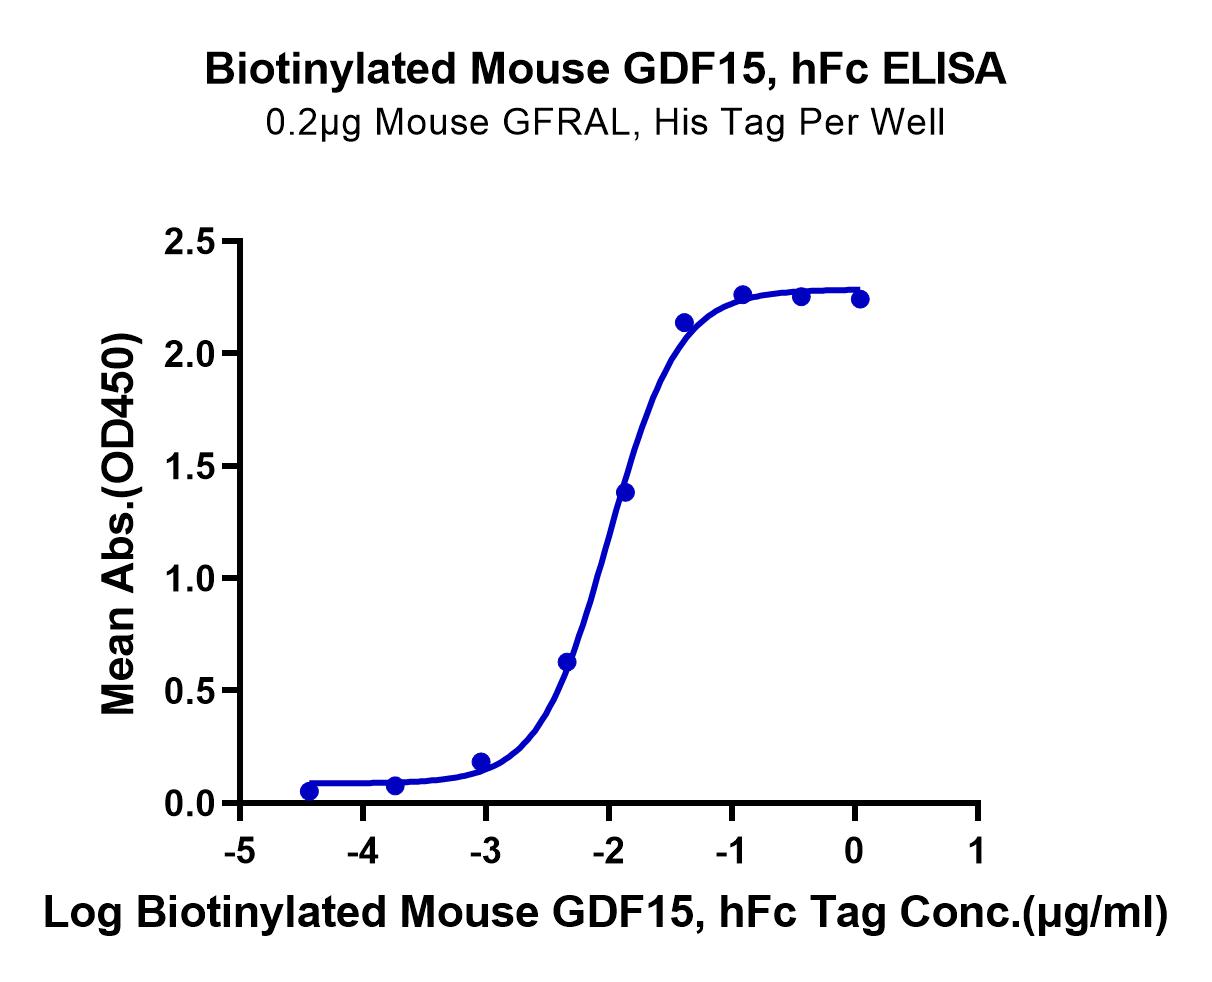 Biotinylated Moues GDF15 Protein (Primary Amine Labeling) (LTP10468)